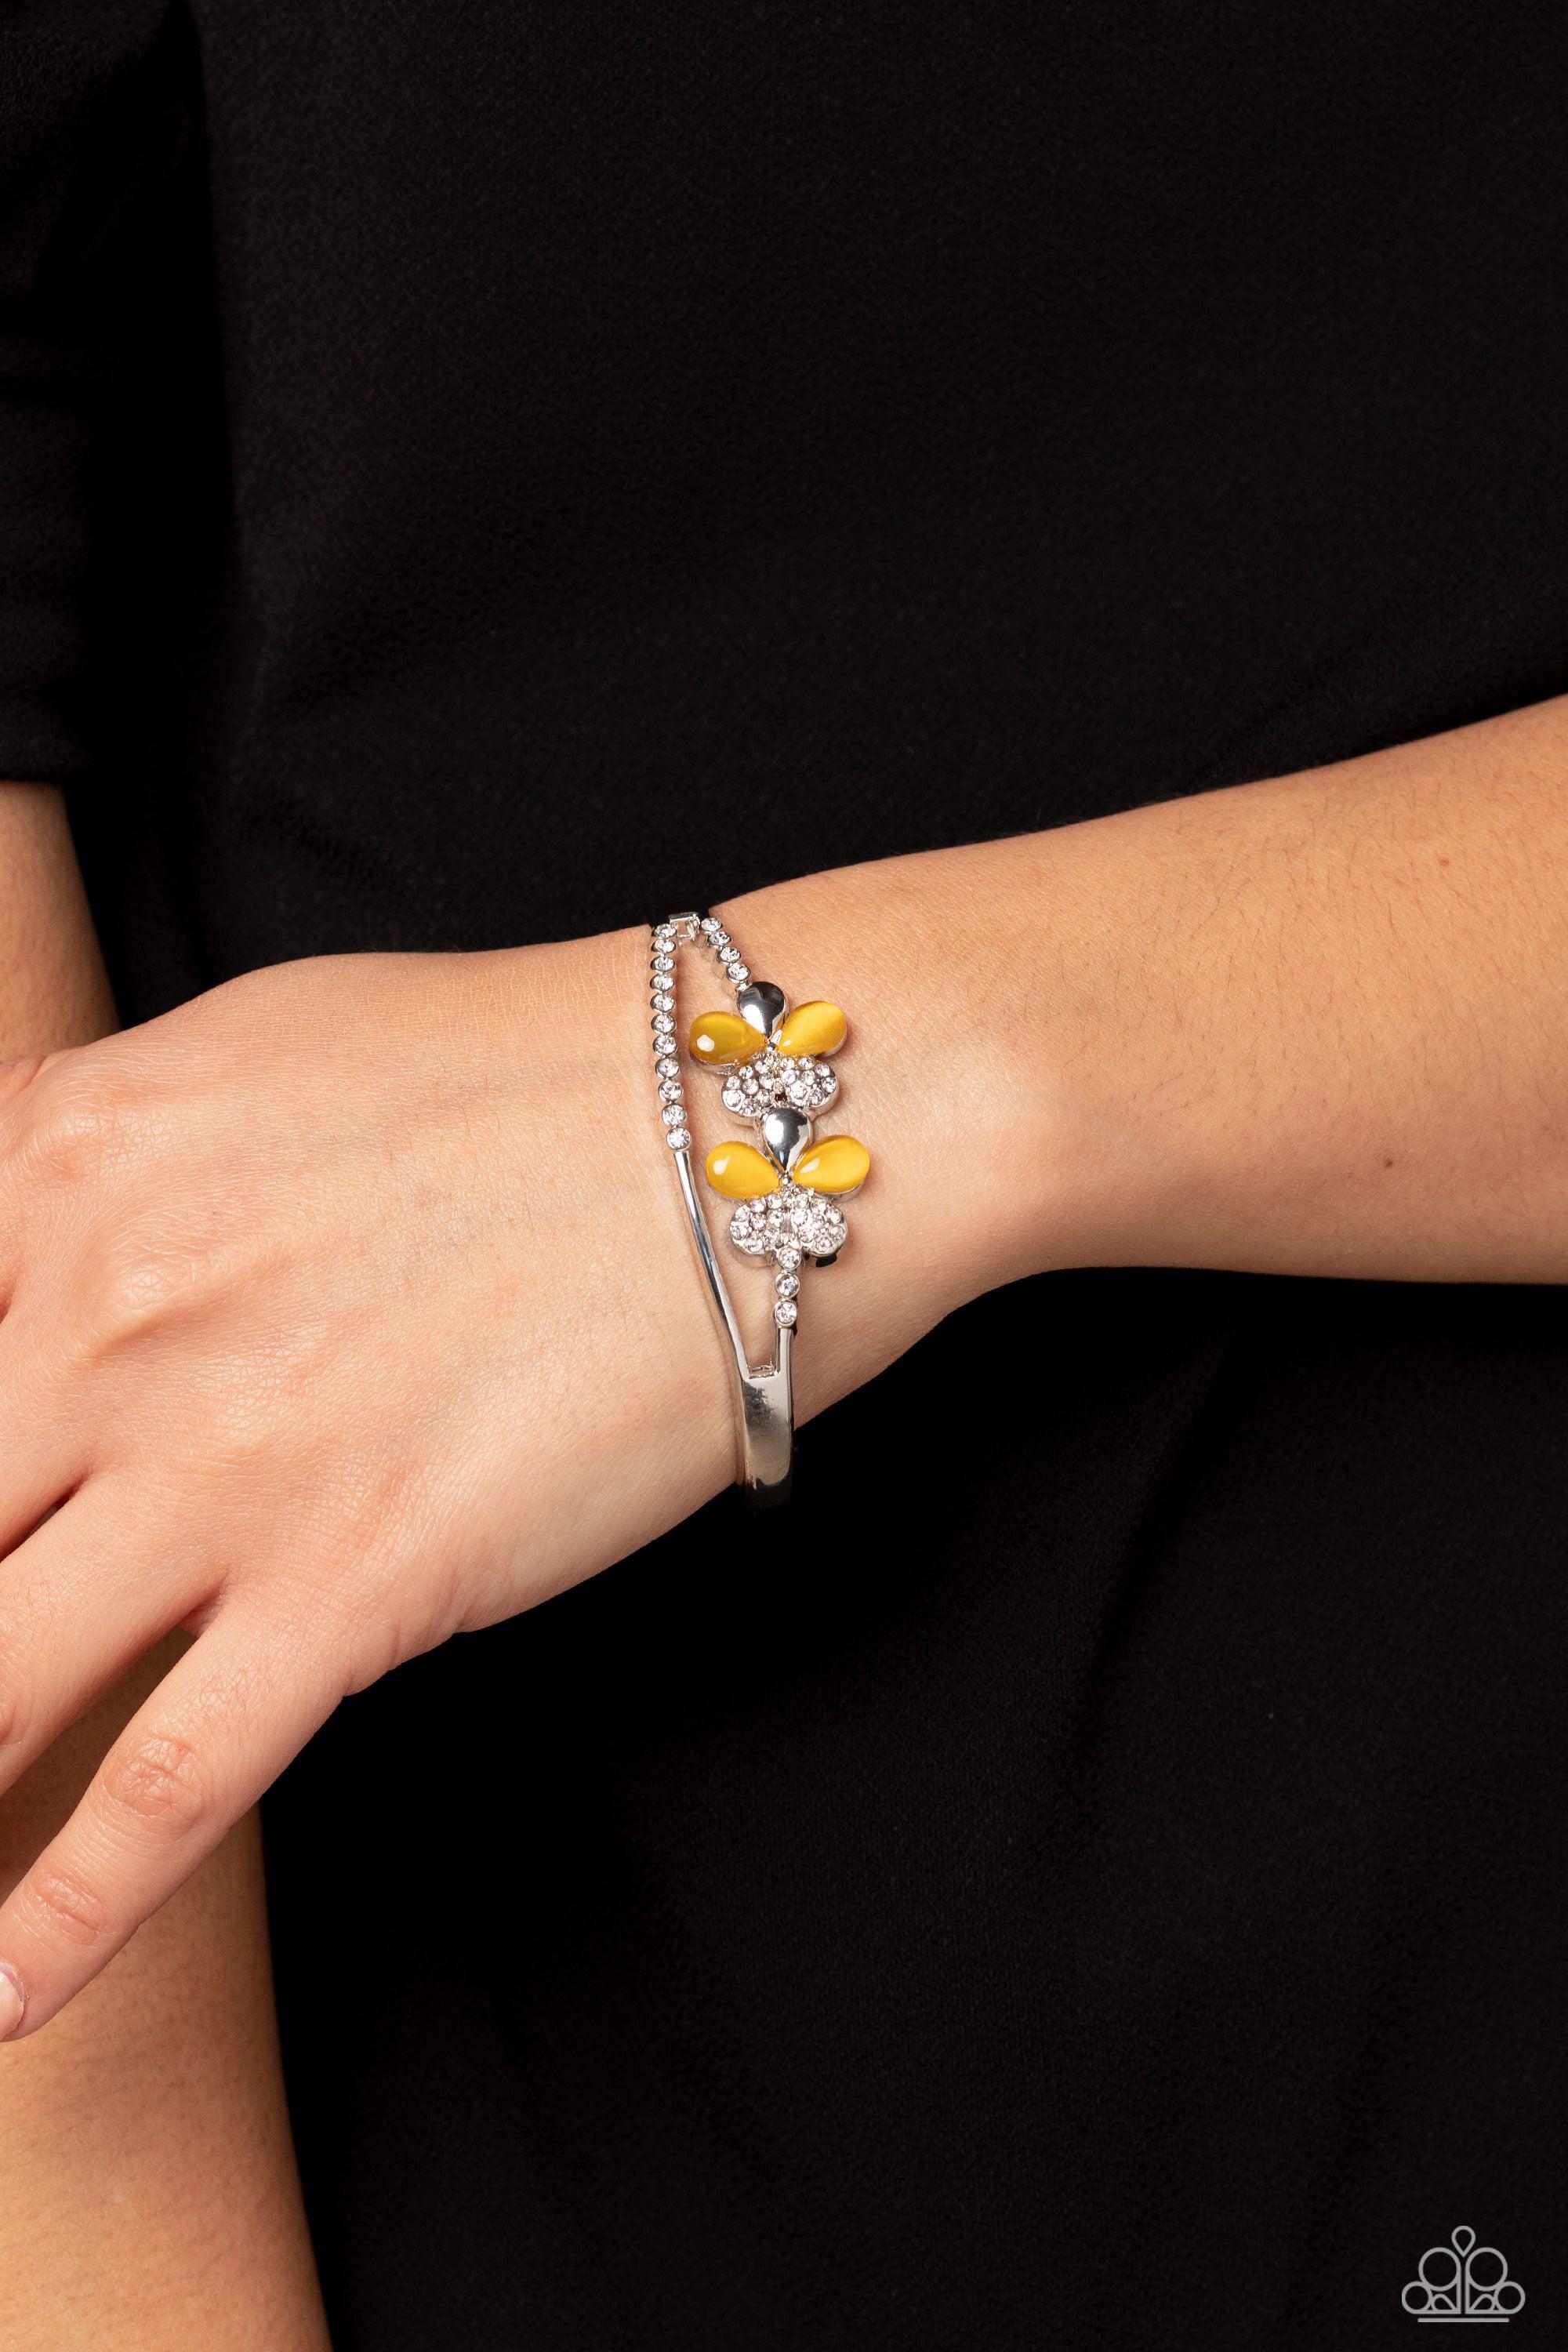 Broadway Stage Yellow Cat's Eye Stone Floral Cuff Bracelet- lightbox - CarasShop.com - $5 Jewelry by Cara Jewels